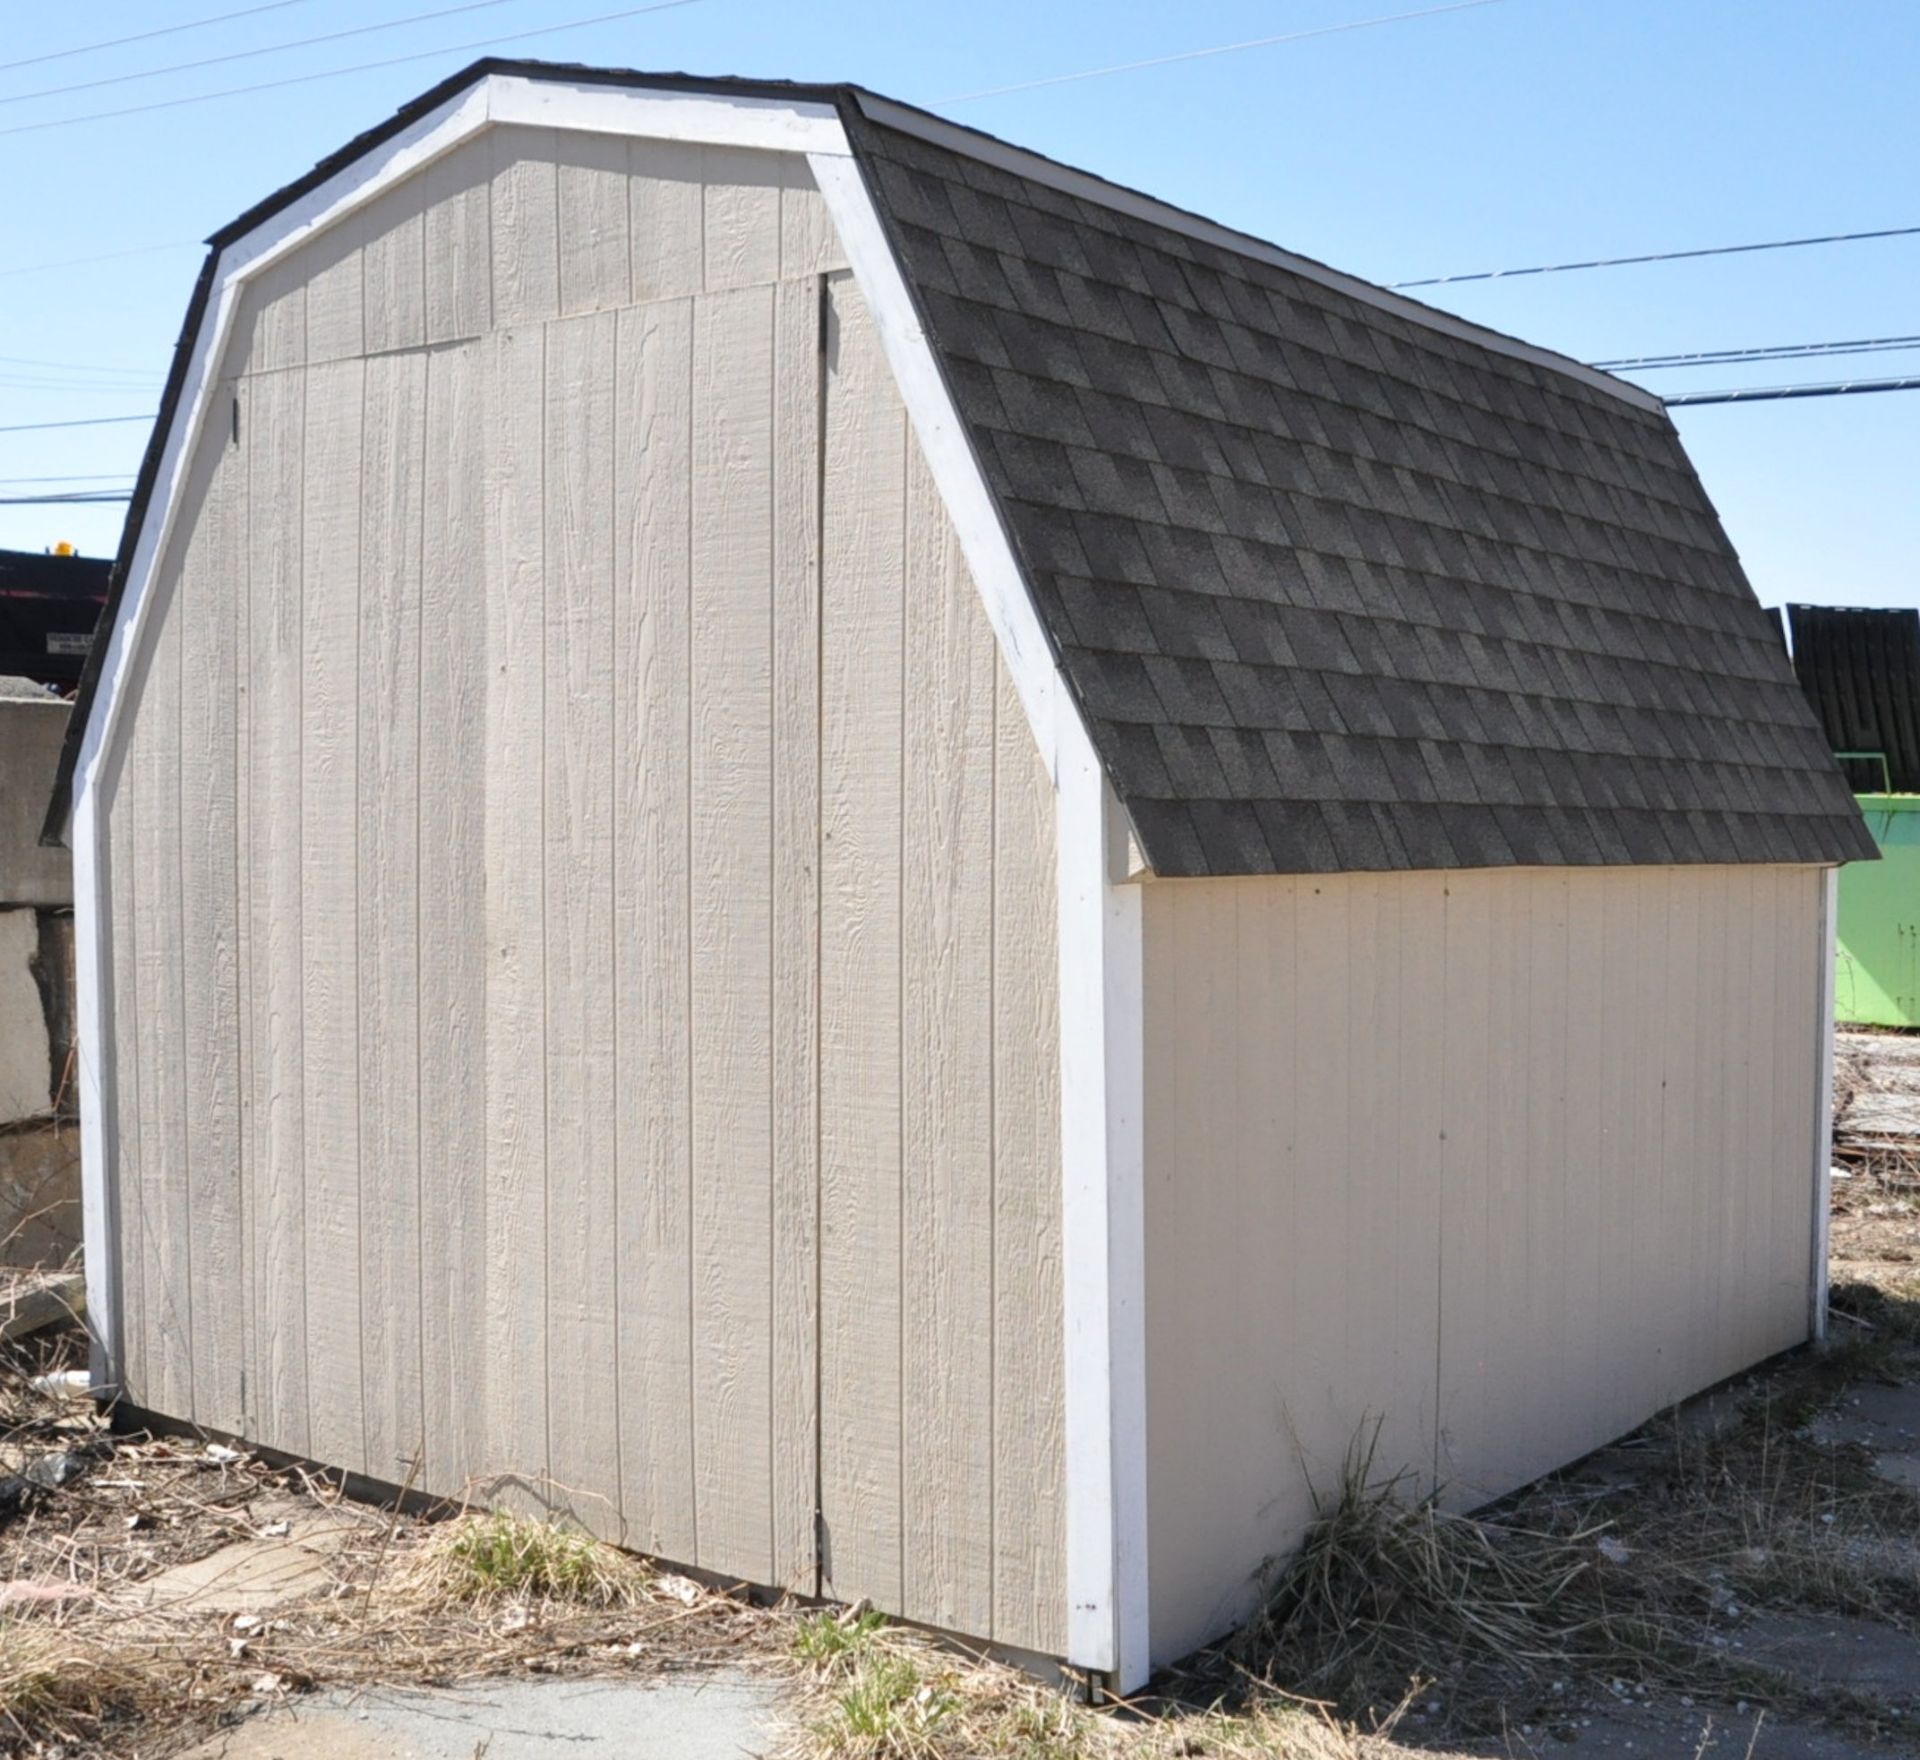 10' x 12' x 9 1/2'H Shed, (Contents Not Includes), (Outside) - Image 2 of 4